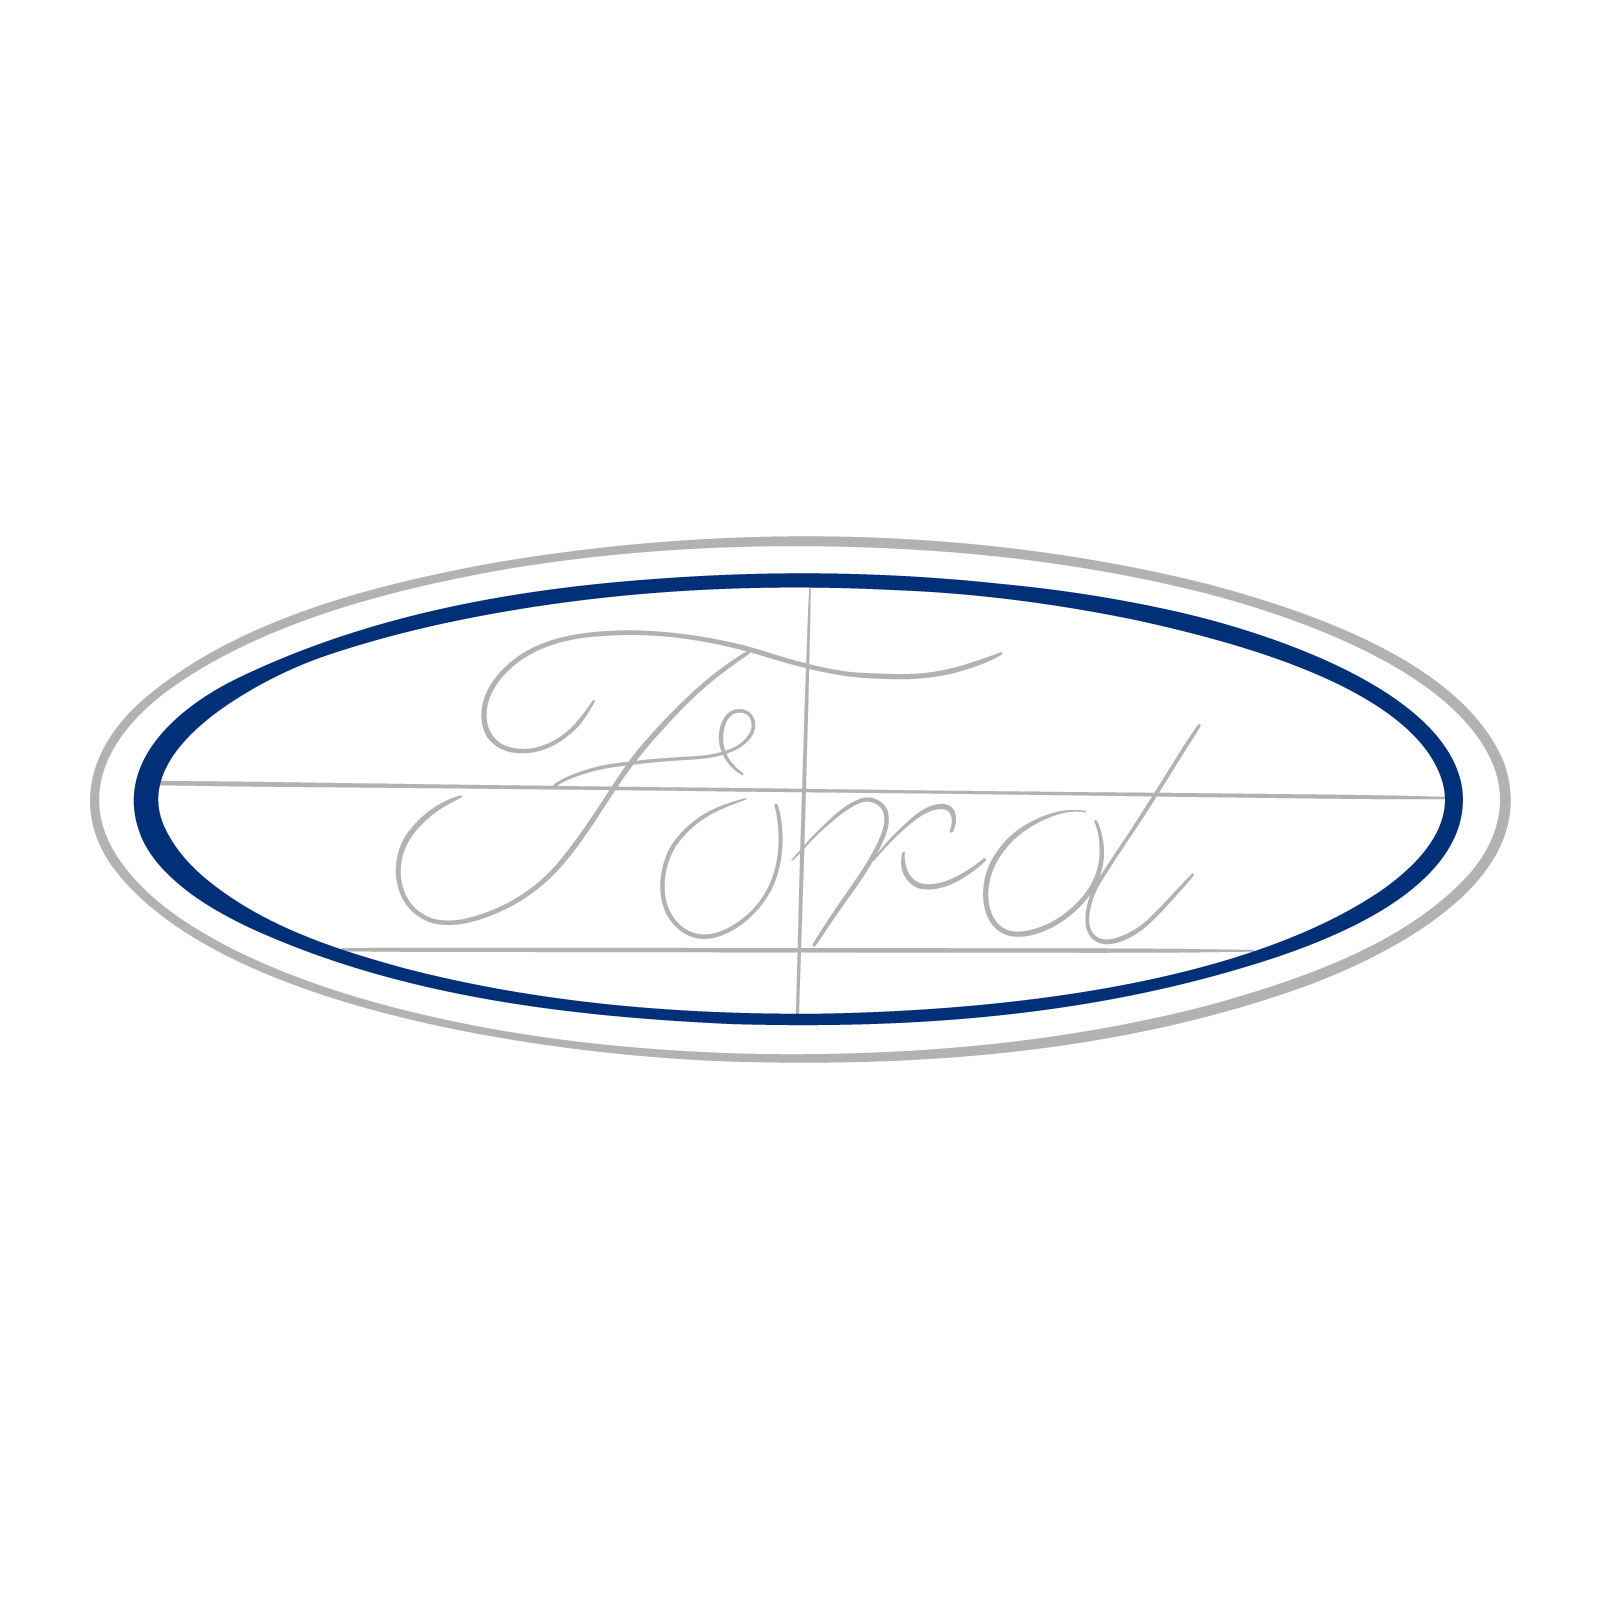 How to draw the Ford logo - step 04